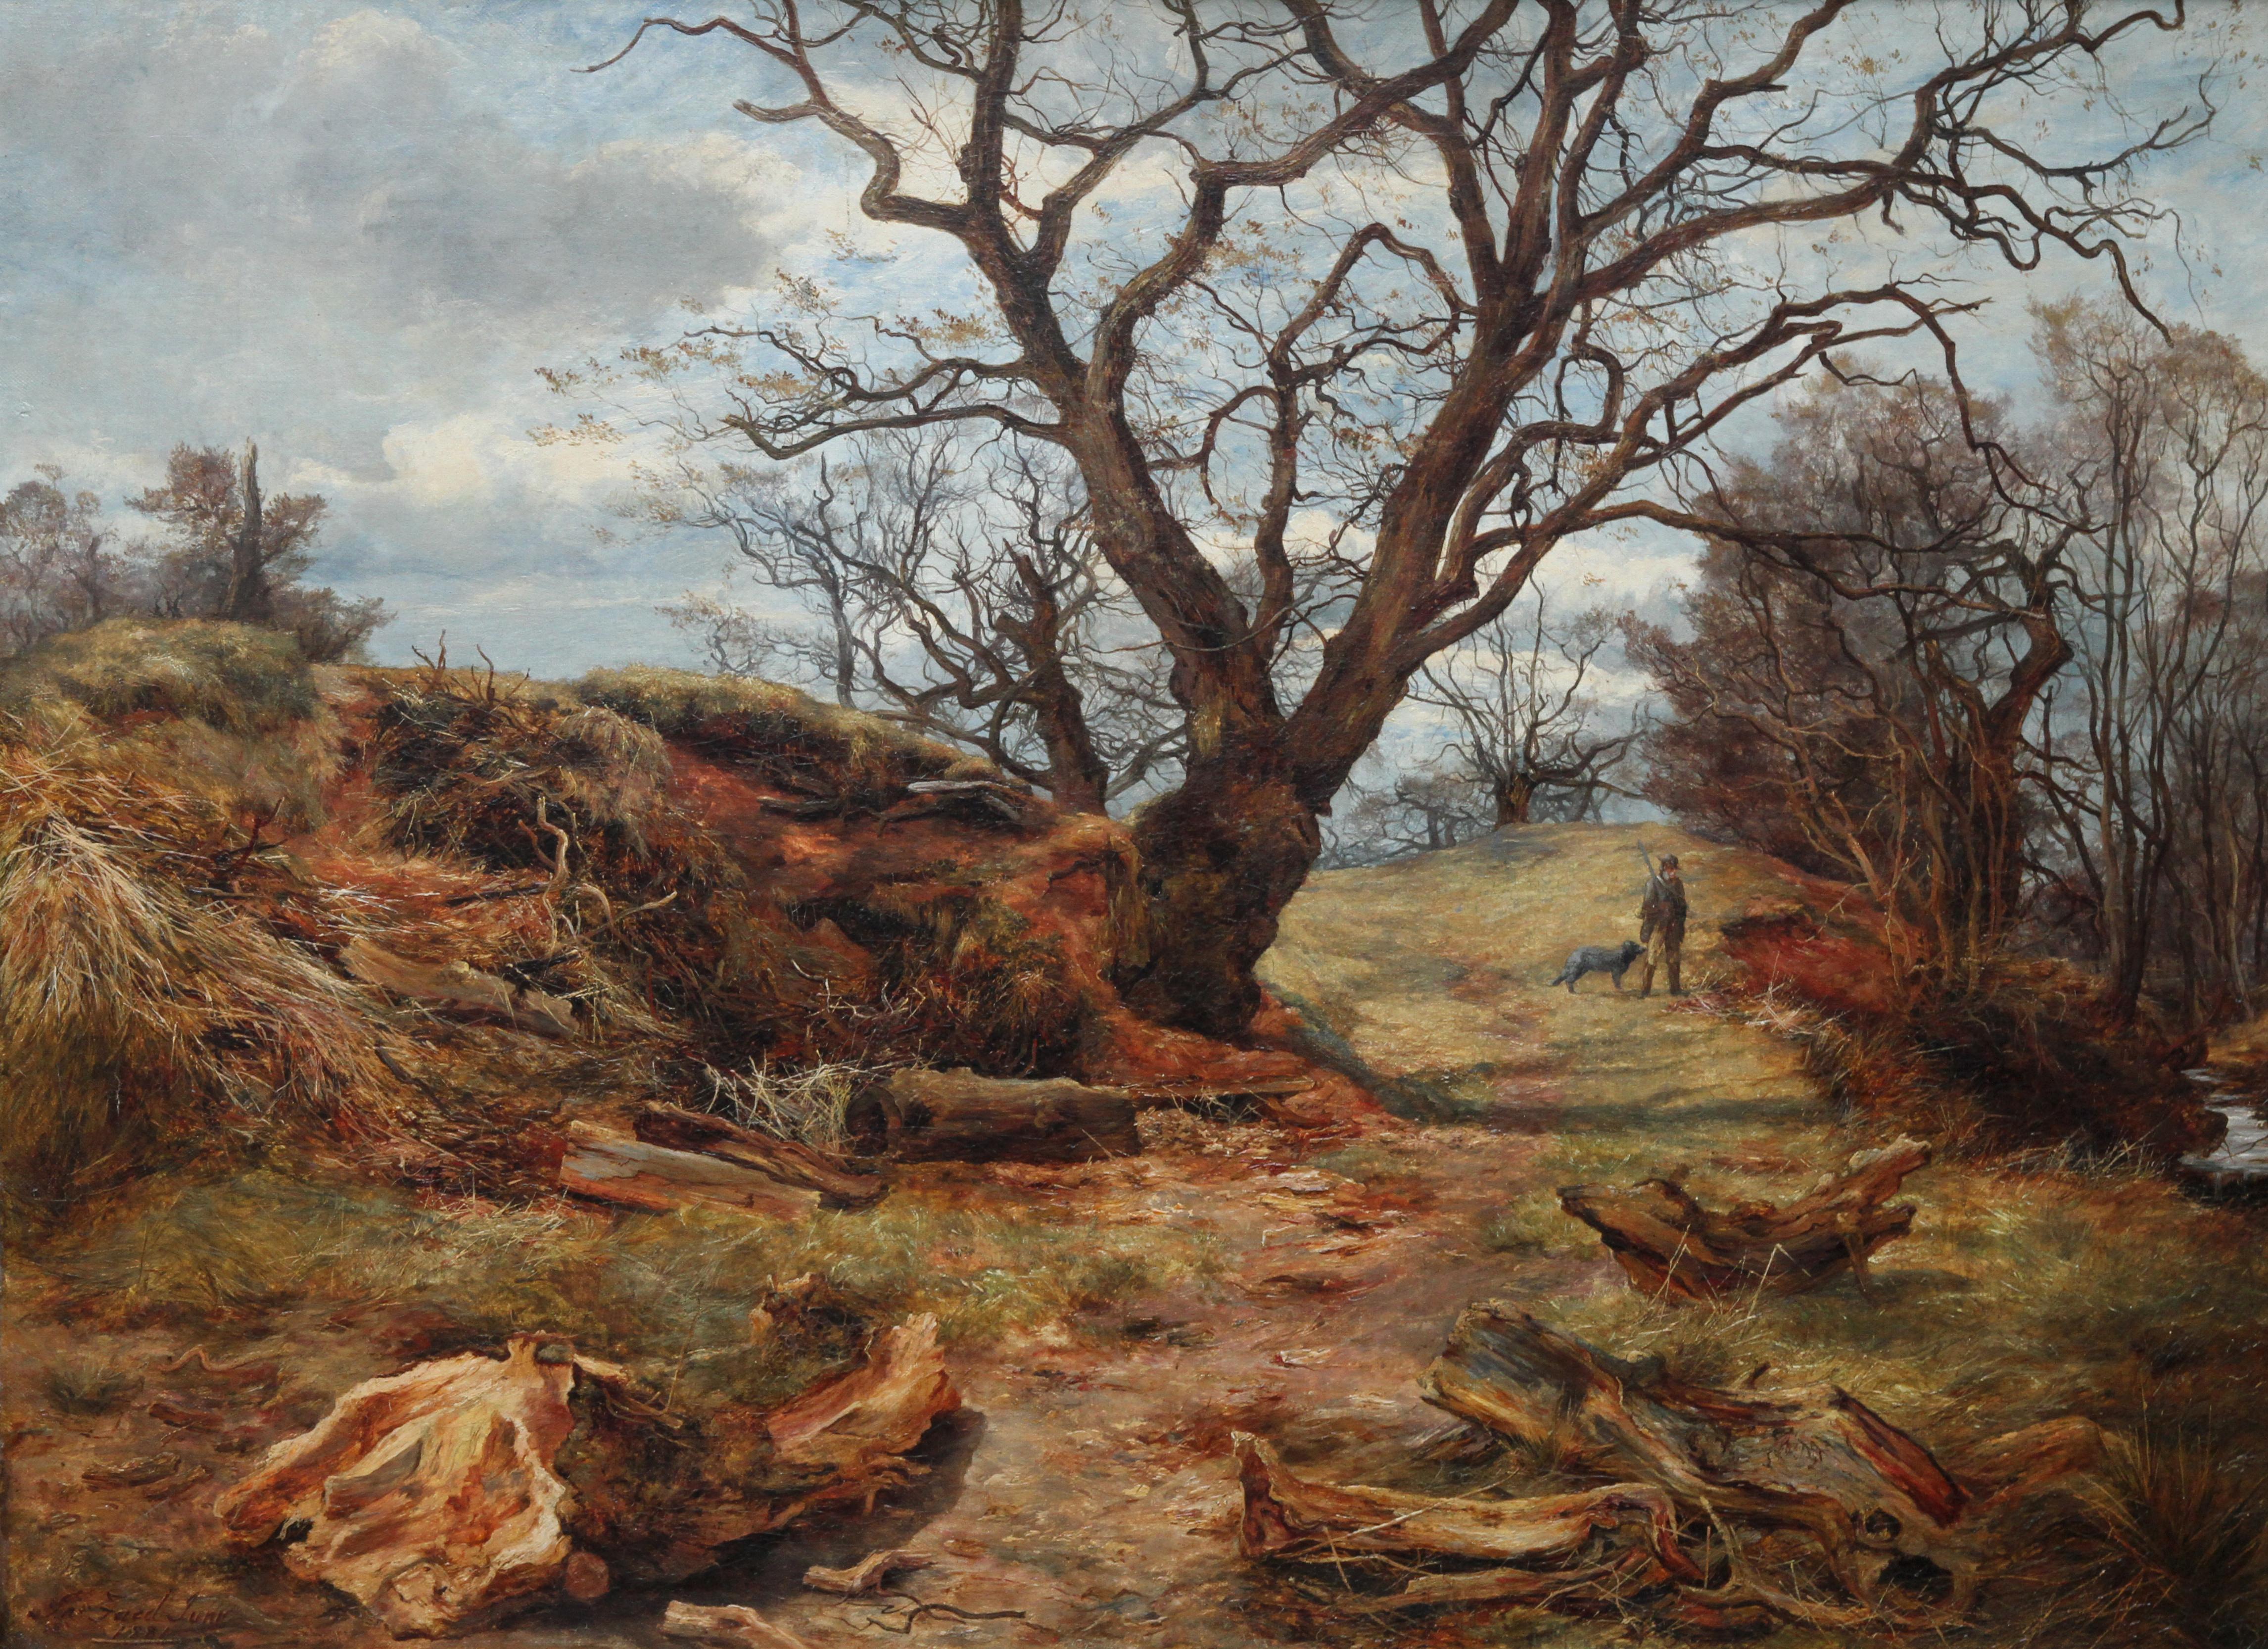 This stunning Victorian 19th century oil painting is by Scottish artist James Faed Junior. Despite the title, the focus of this autumnal landscape is the beautiful scattered remains of a tree trunk in the foreground. Faed has captured the texture